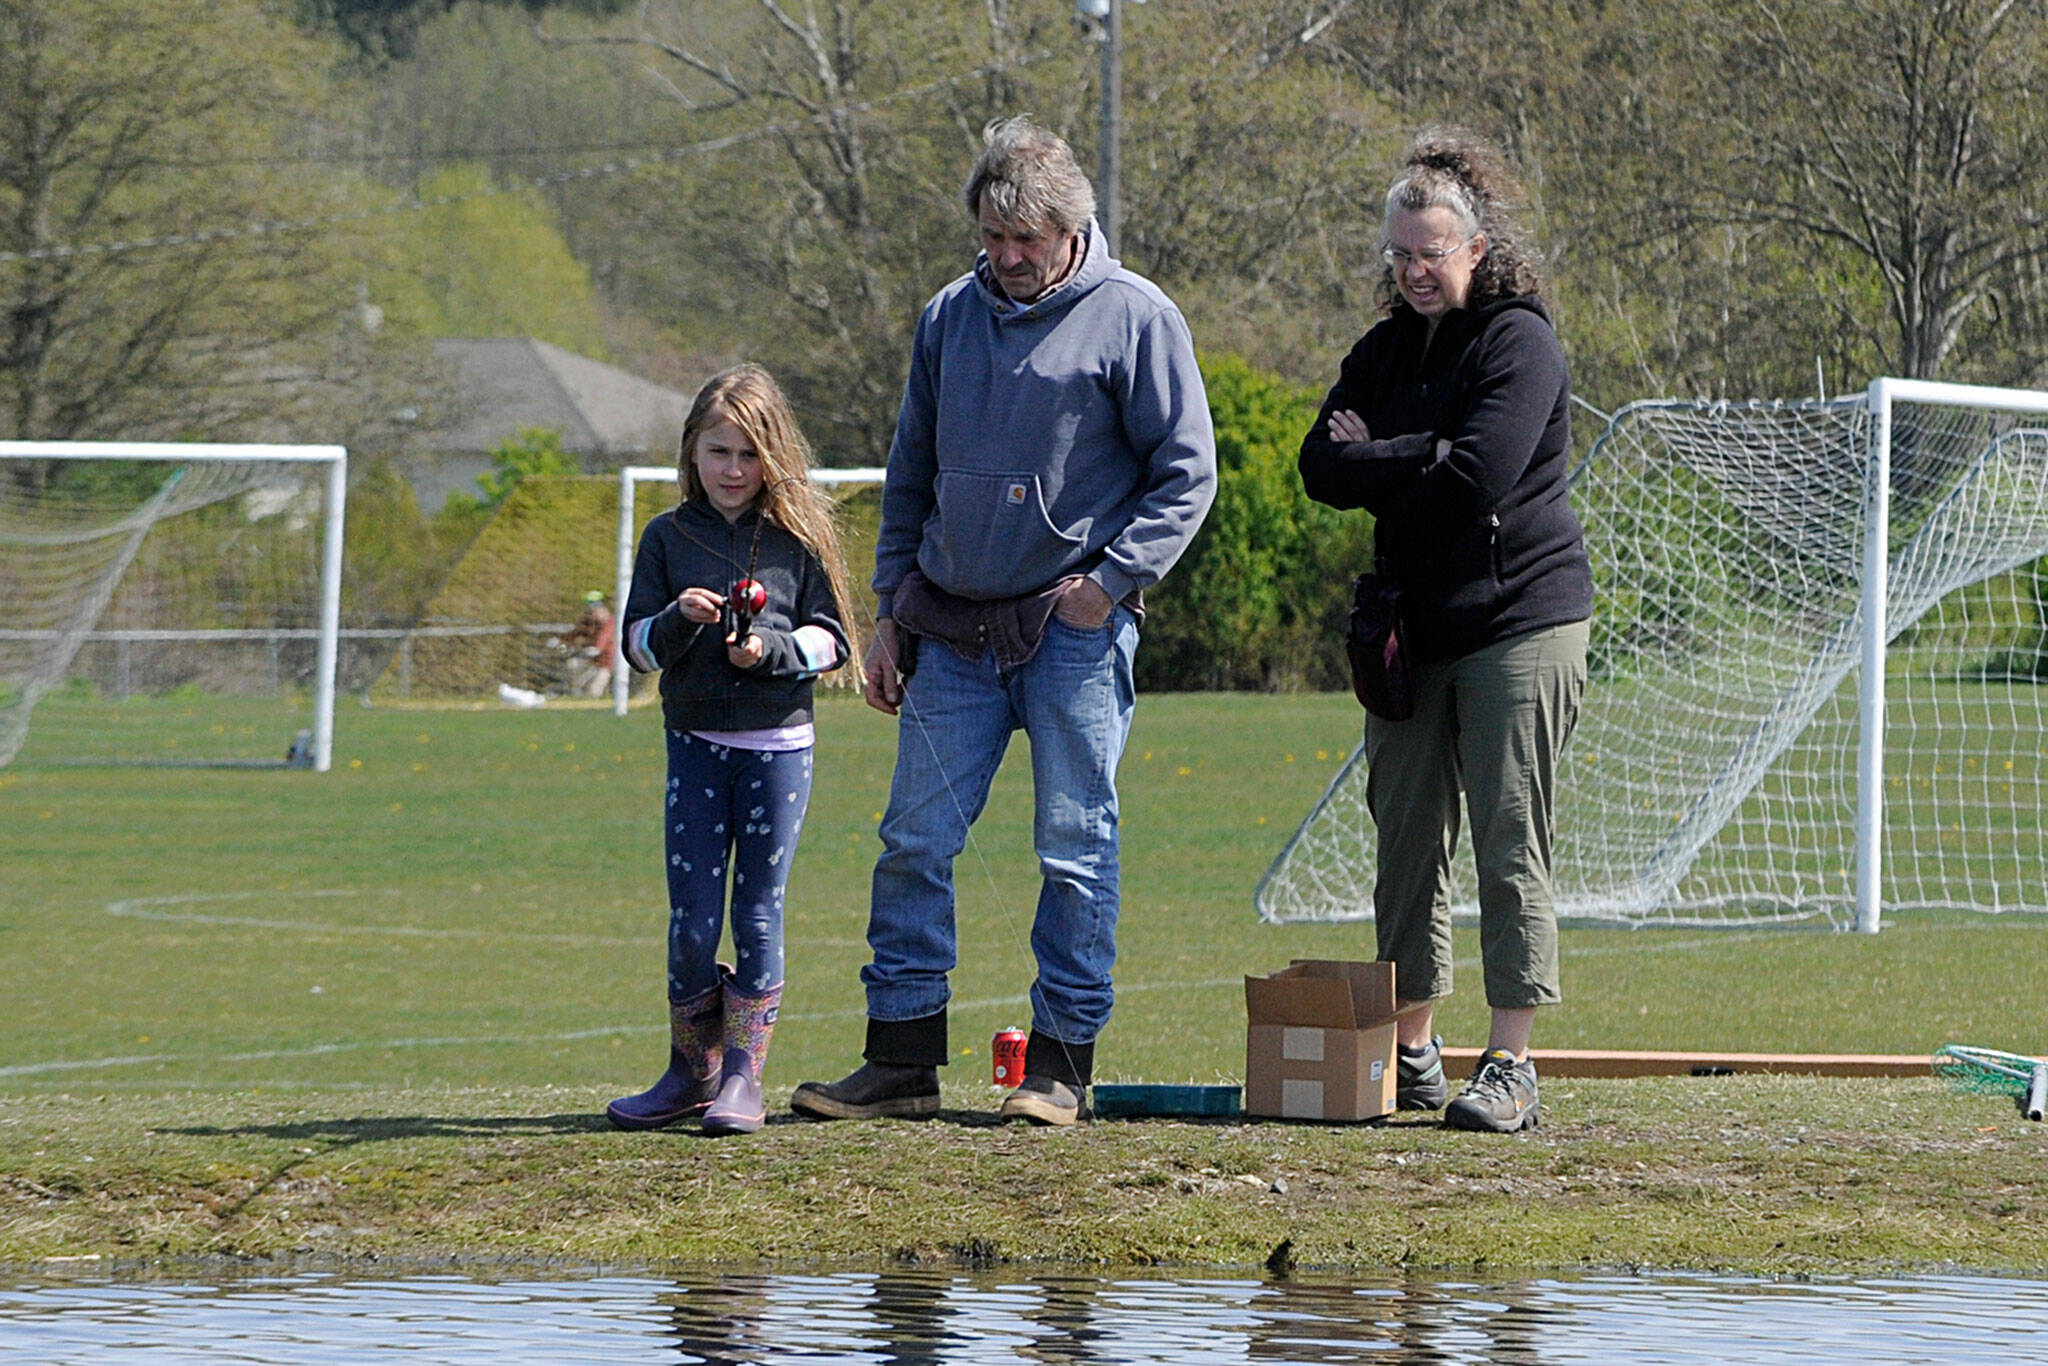 Brooke Pederson, 9, of Joyce reels as parents Erik and Paula watch. She soon caught her first fish during the 2022 Kids Fishing Day. (Matthew Nash/Olympic Peninsula News Group)